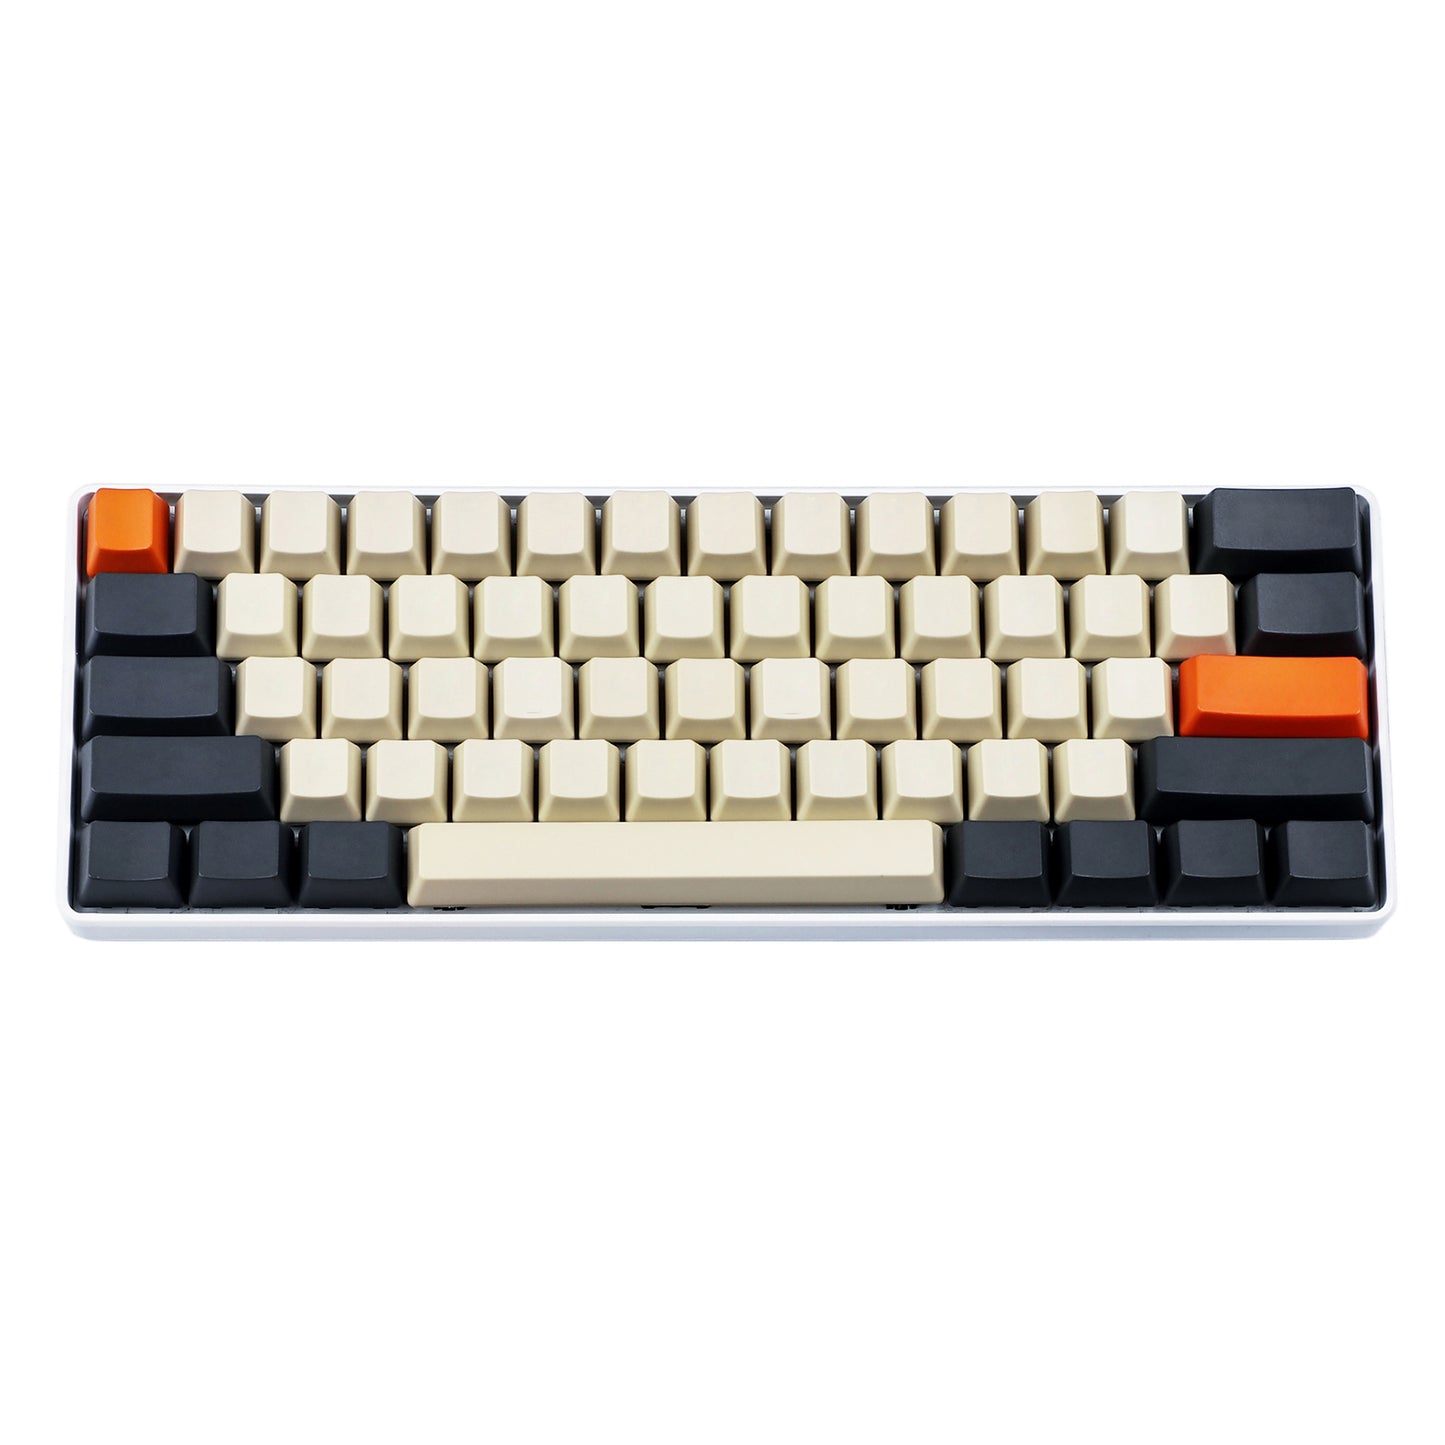 104 Carbon Blank Keycaps(OEM Profile PBT 1.5mm Thickness)